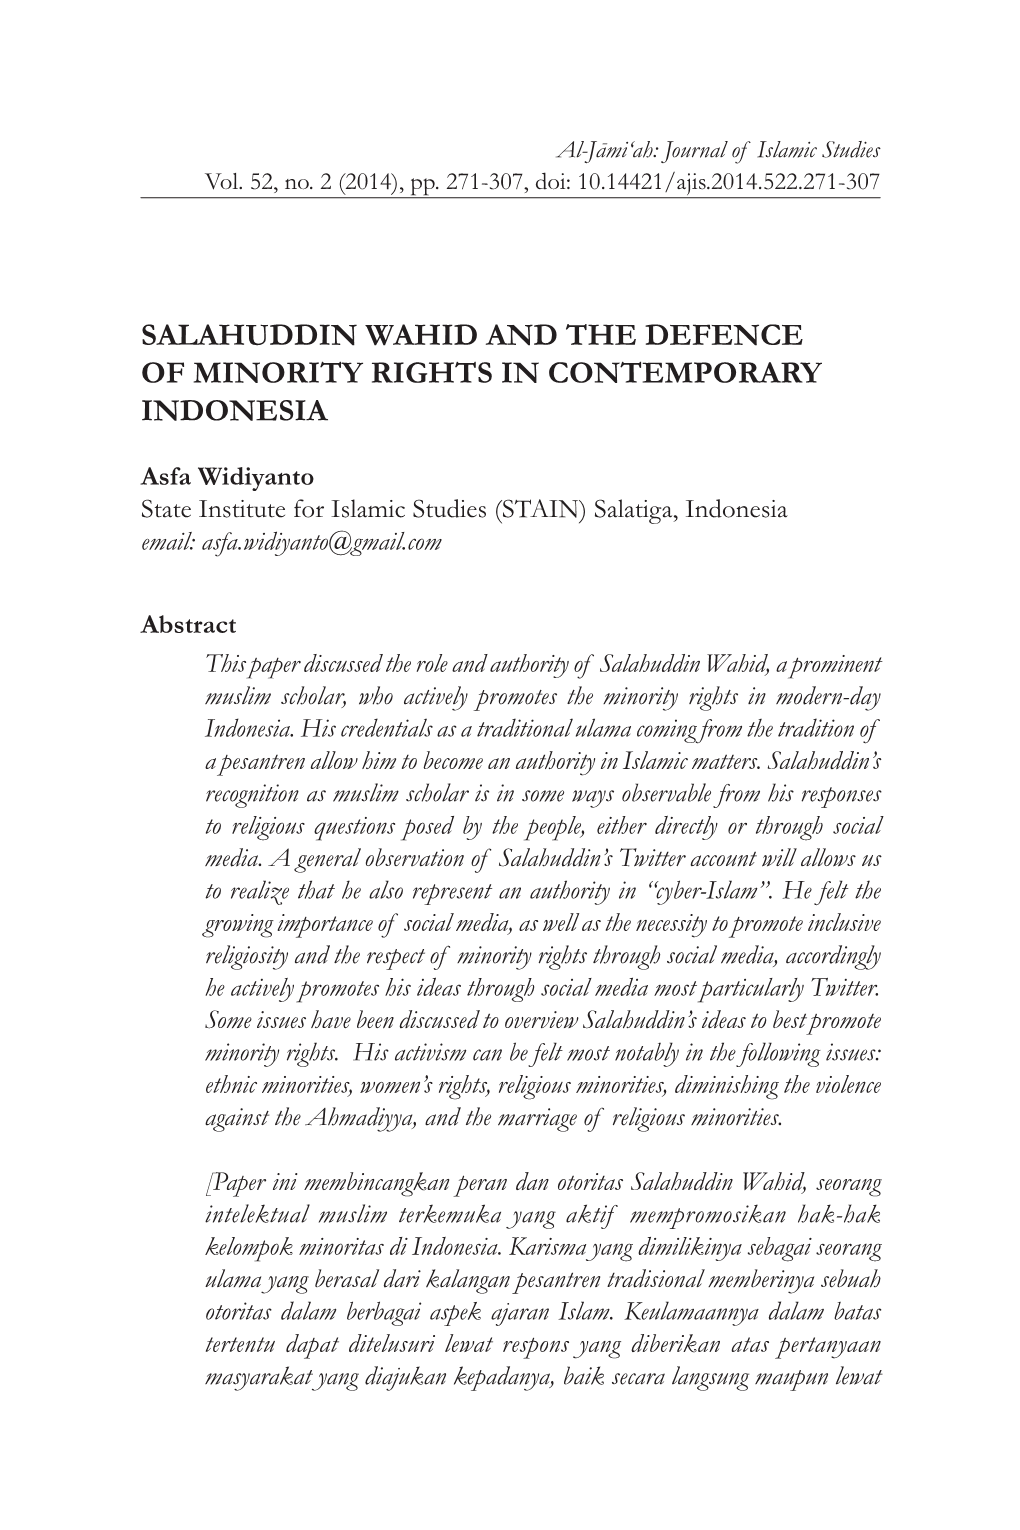 Salahuddin Wahid and the Defence of Minority Rights in Contemporary Indonesia